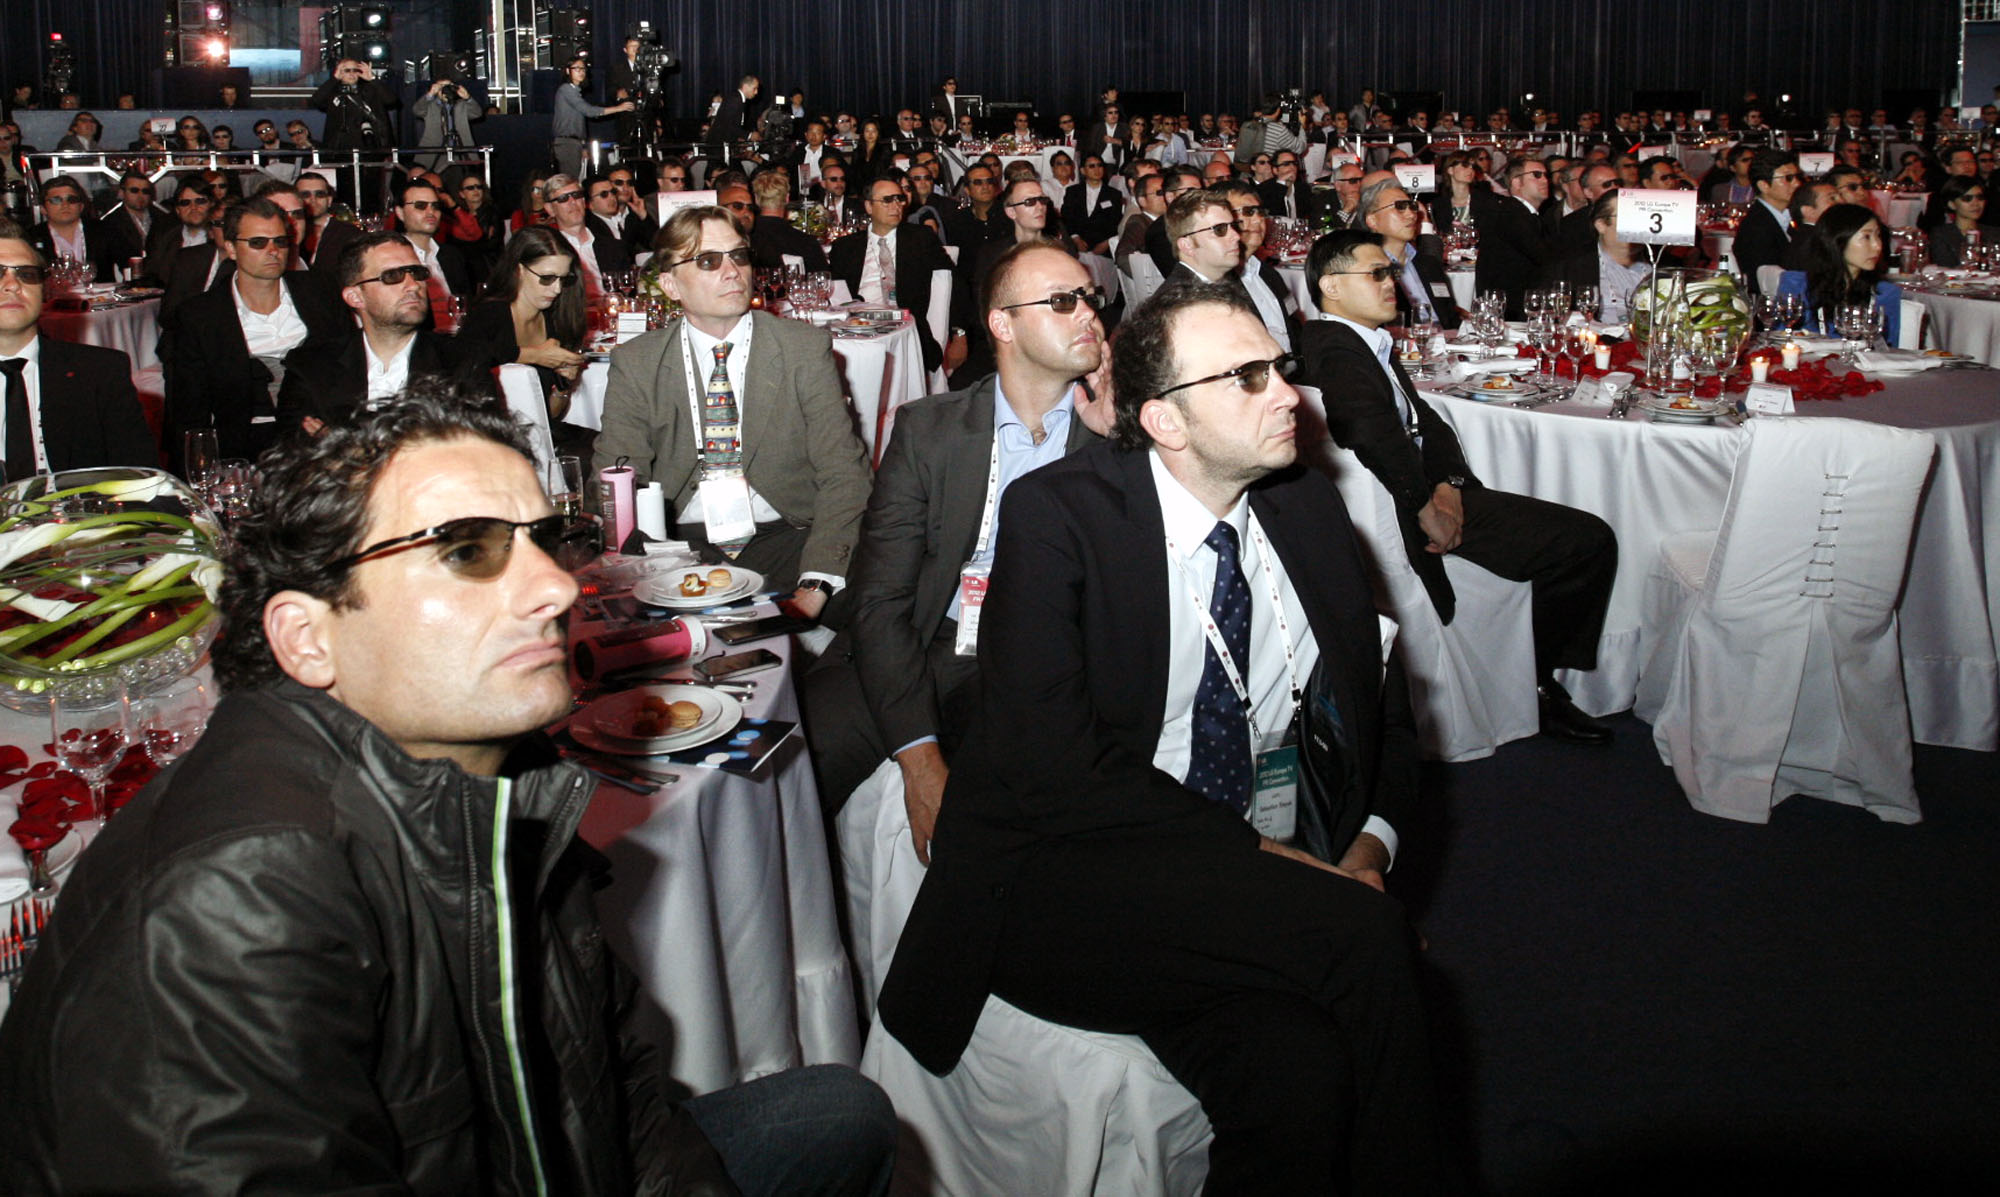 Attendees wearing 3D glasses to watch a 3D video on LG’s new OLED TVs at Salle des Etoiles in Monaco.